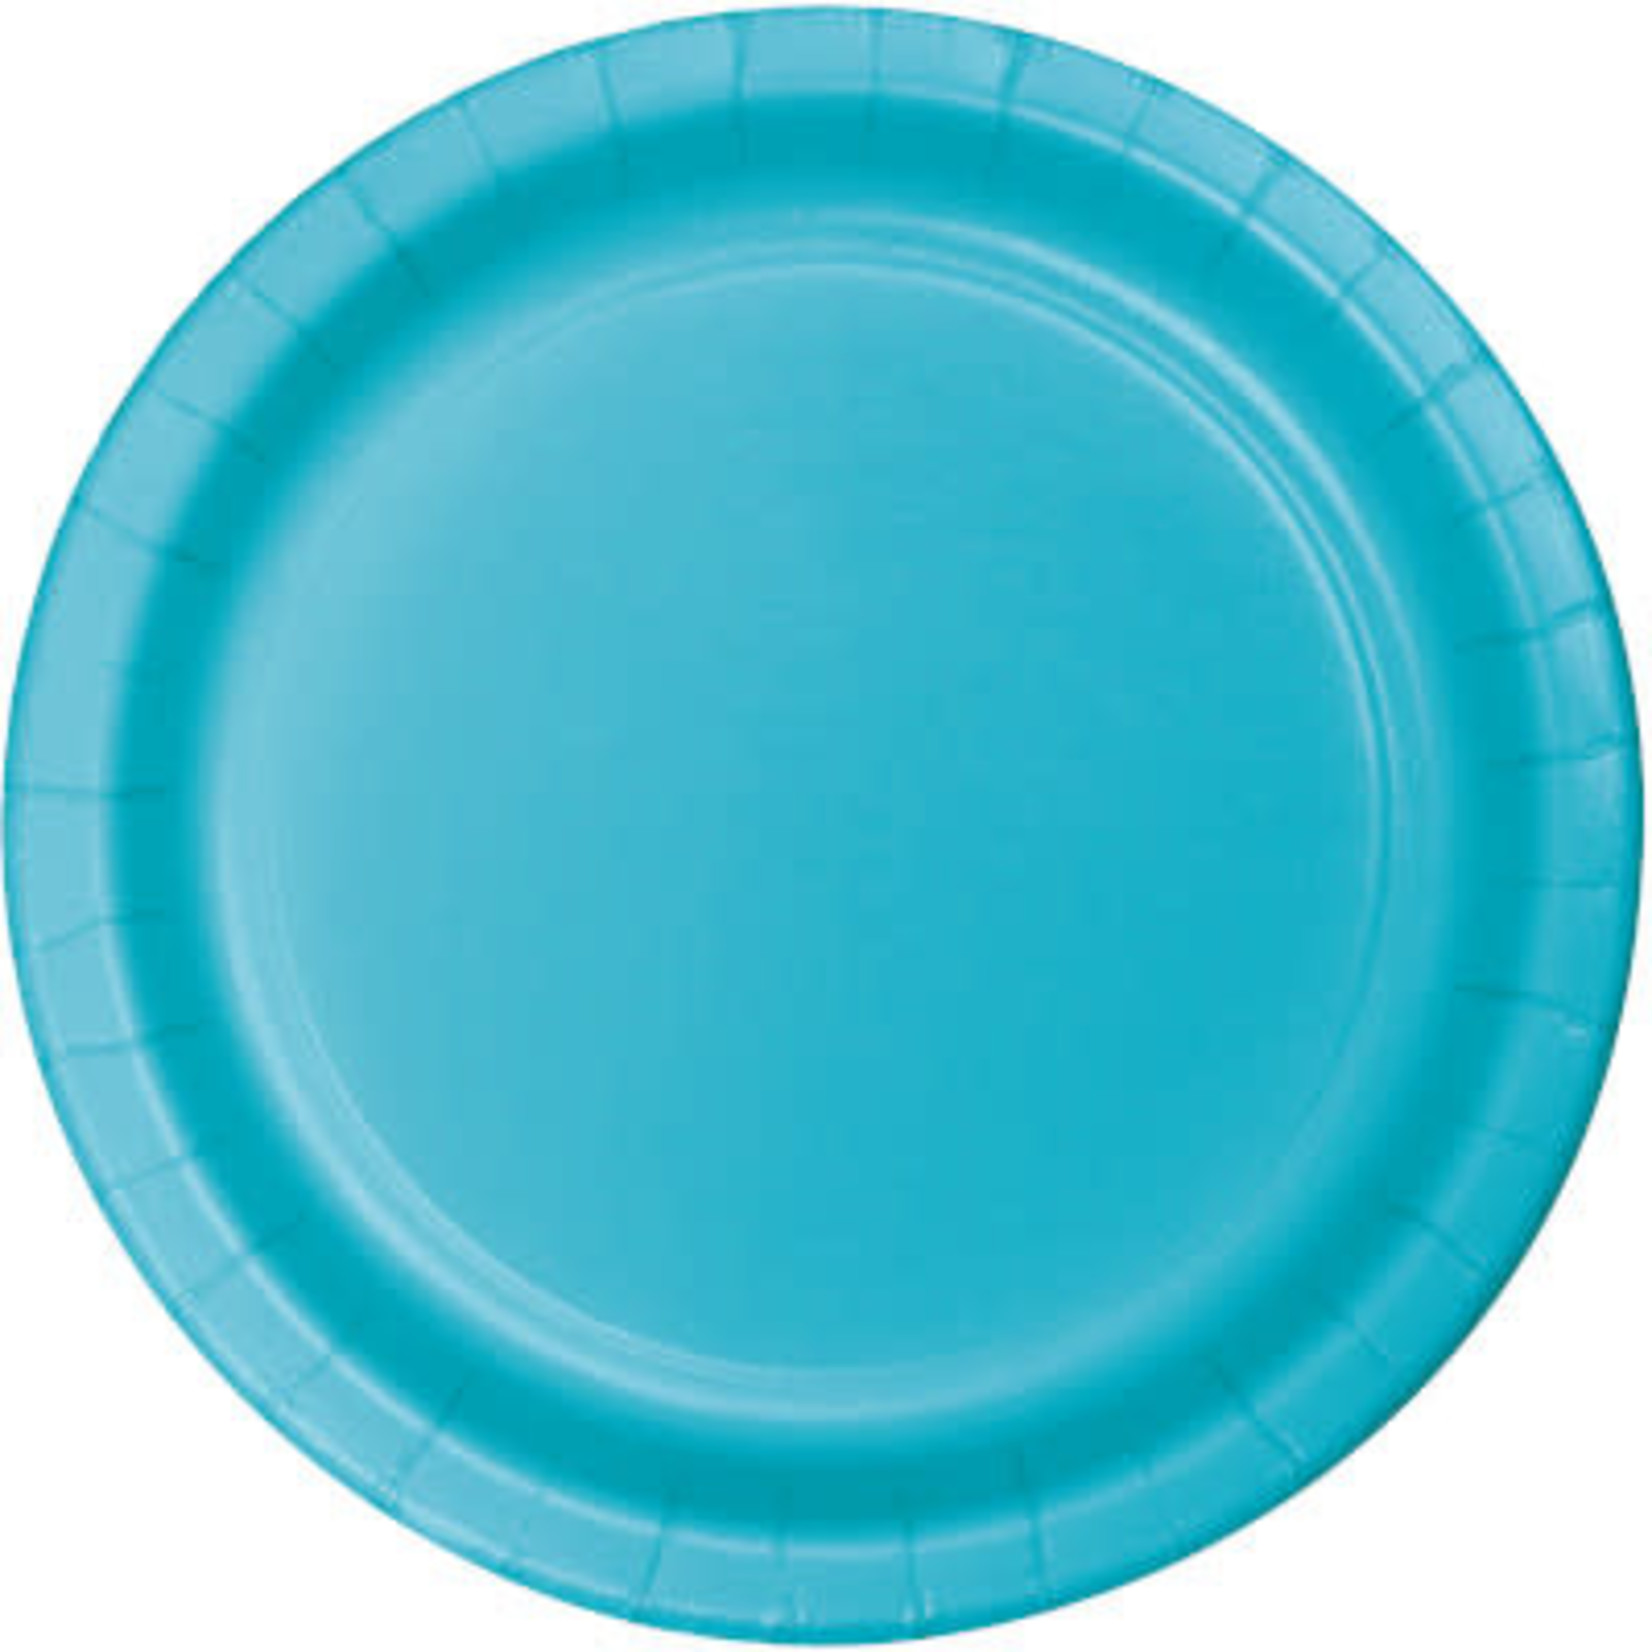 Touch of Color 10" Bermuda Blue Paper Banquet Plates - 24ct.